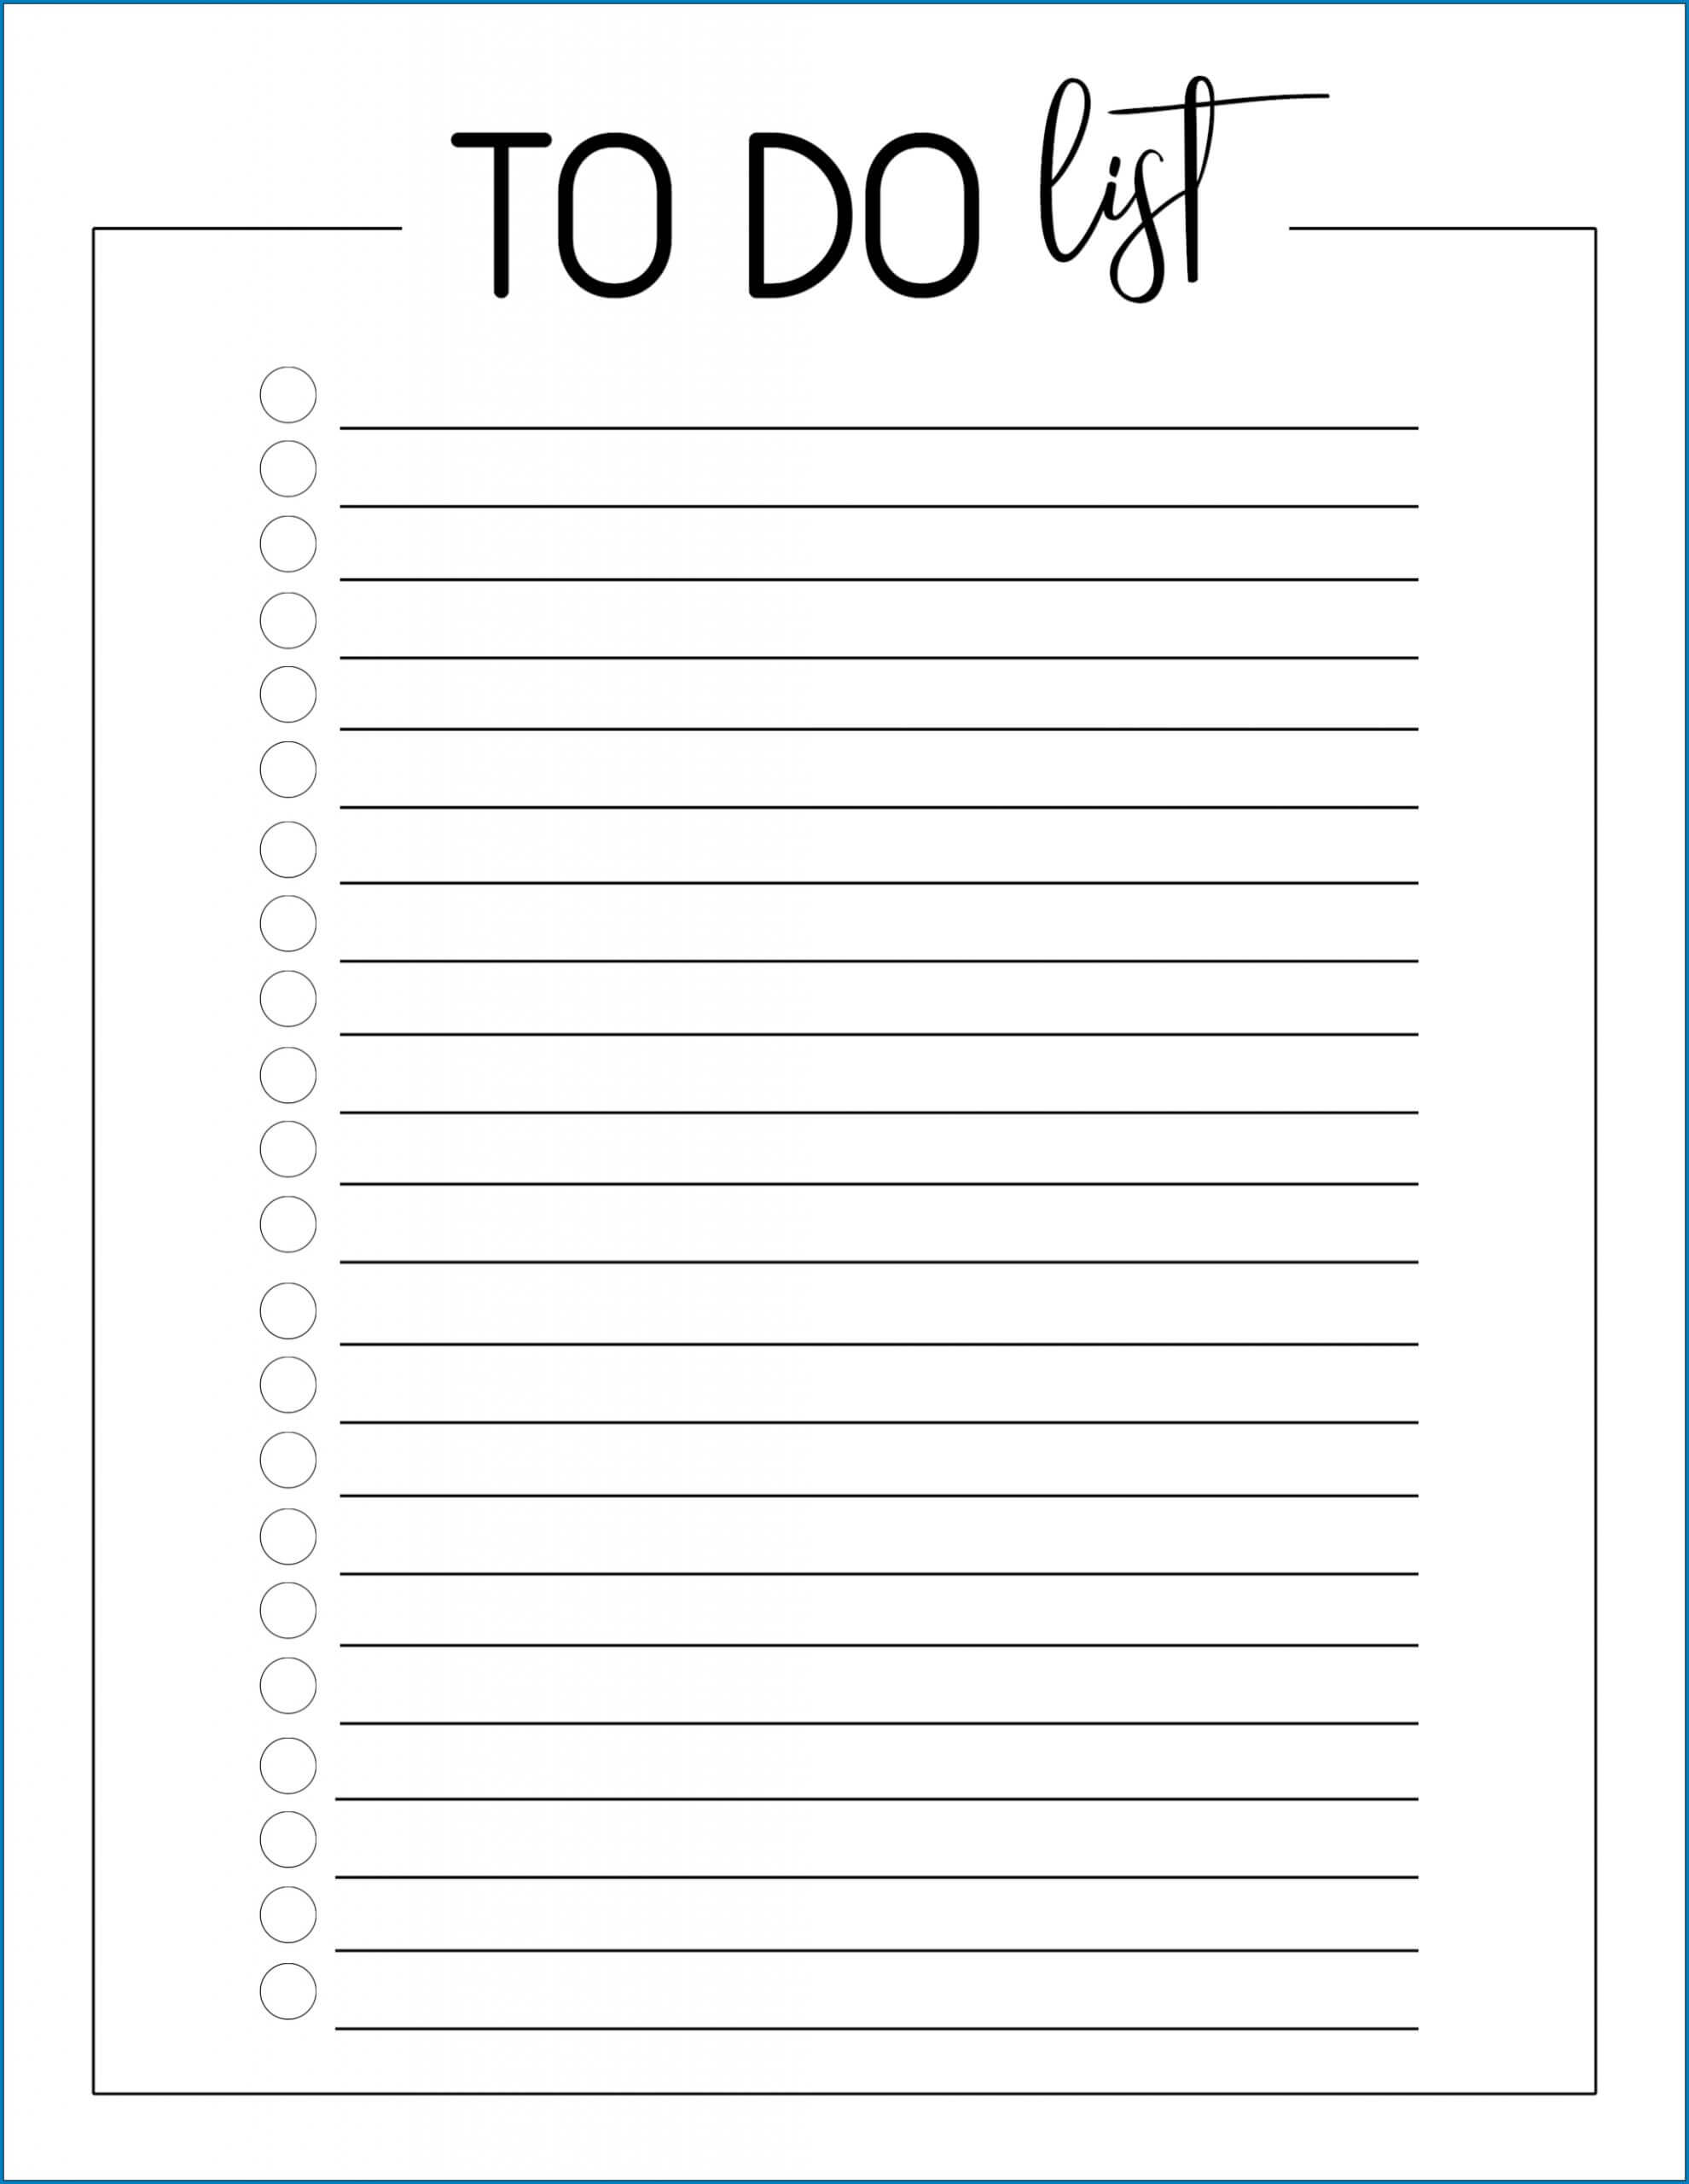 √ Free To Do List Printable Template | Templateral Within Blank To Do List Template